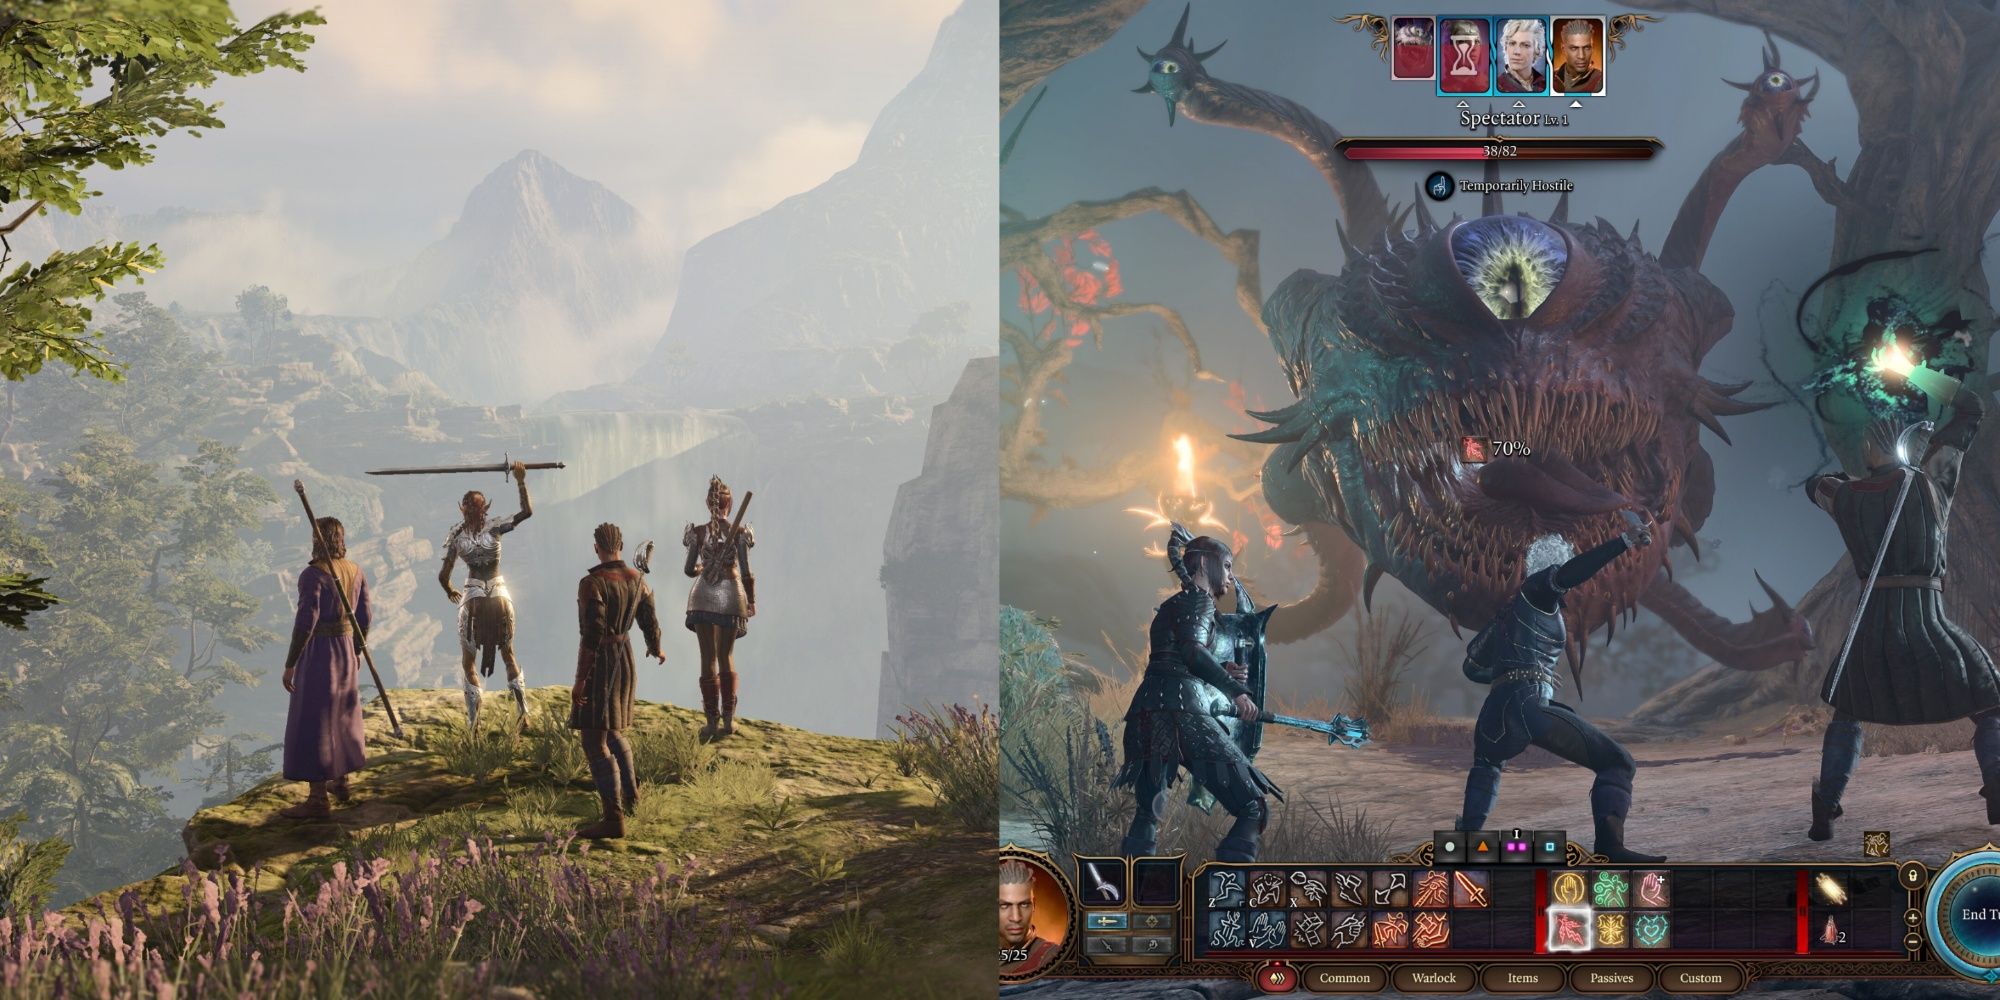 Baldur's gate 3 featured image group overlooking valley and fighting monster